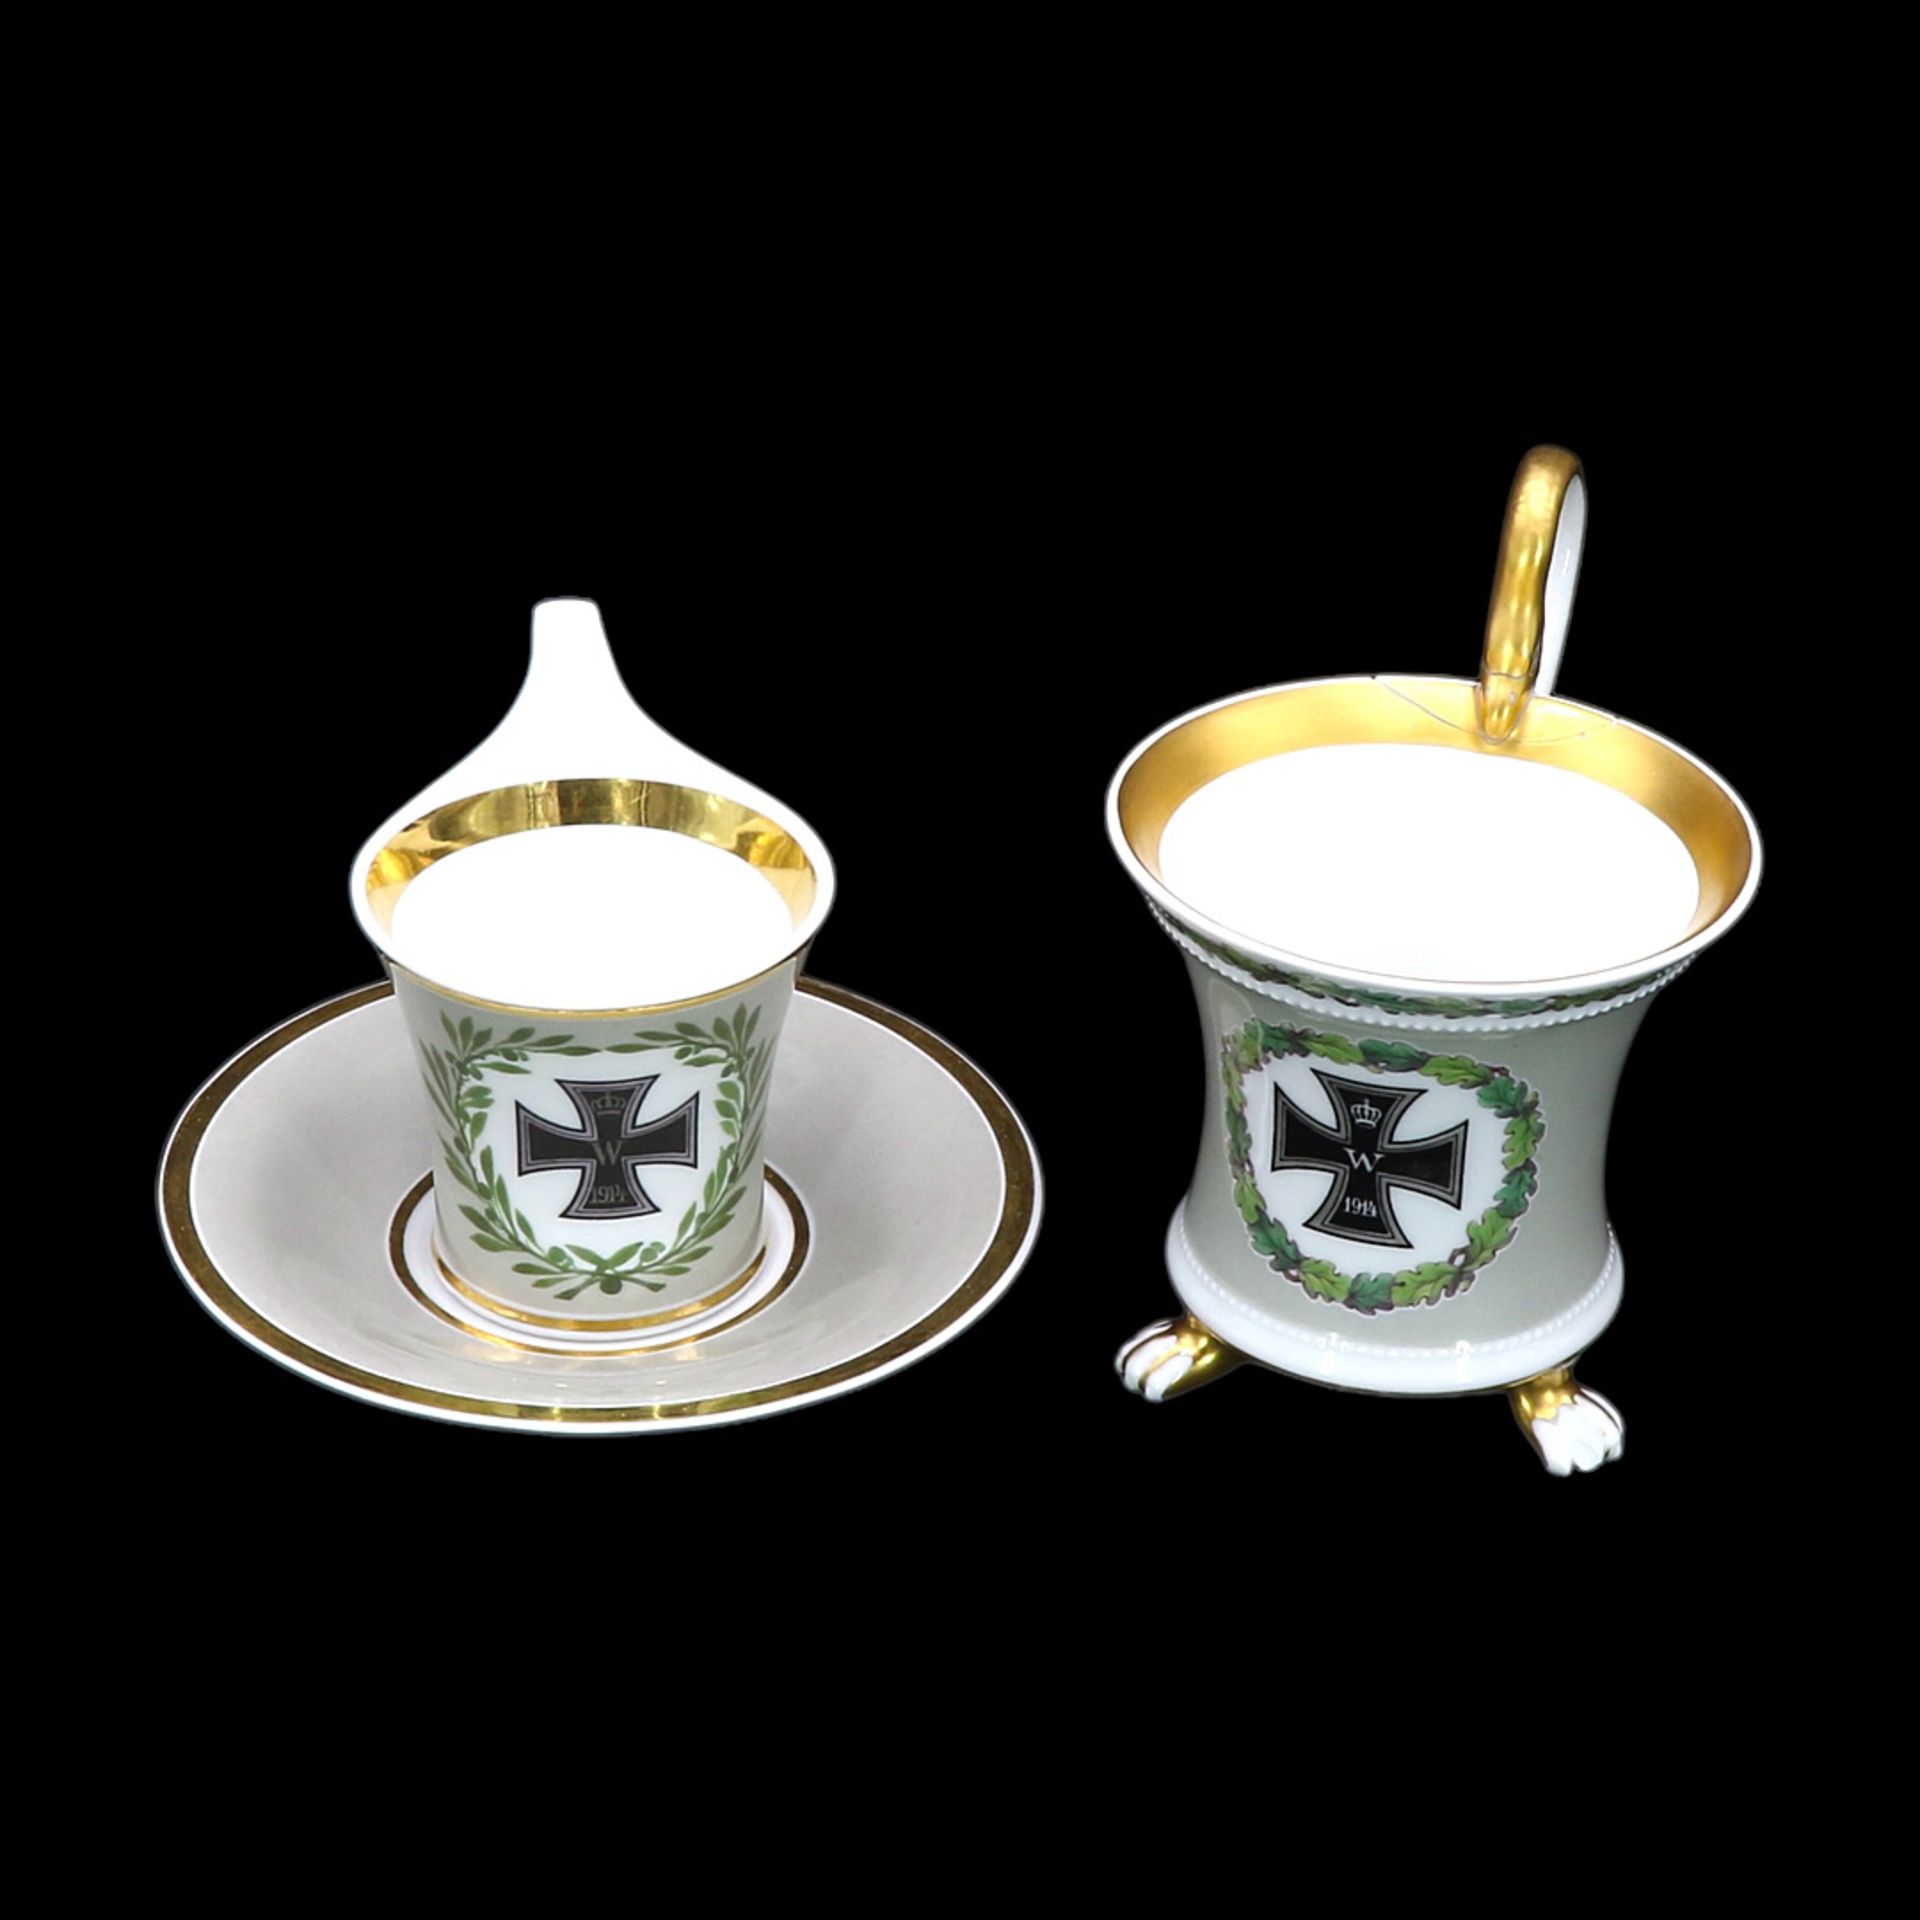 KPM Berlin cup with "Iron Cross" and saucer